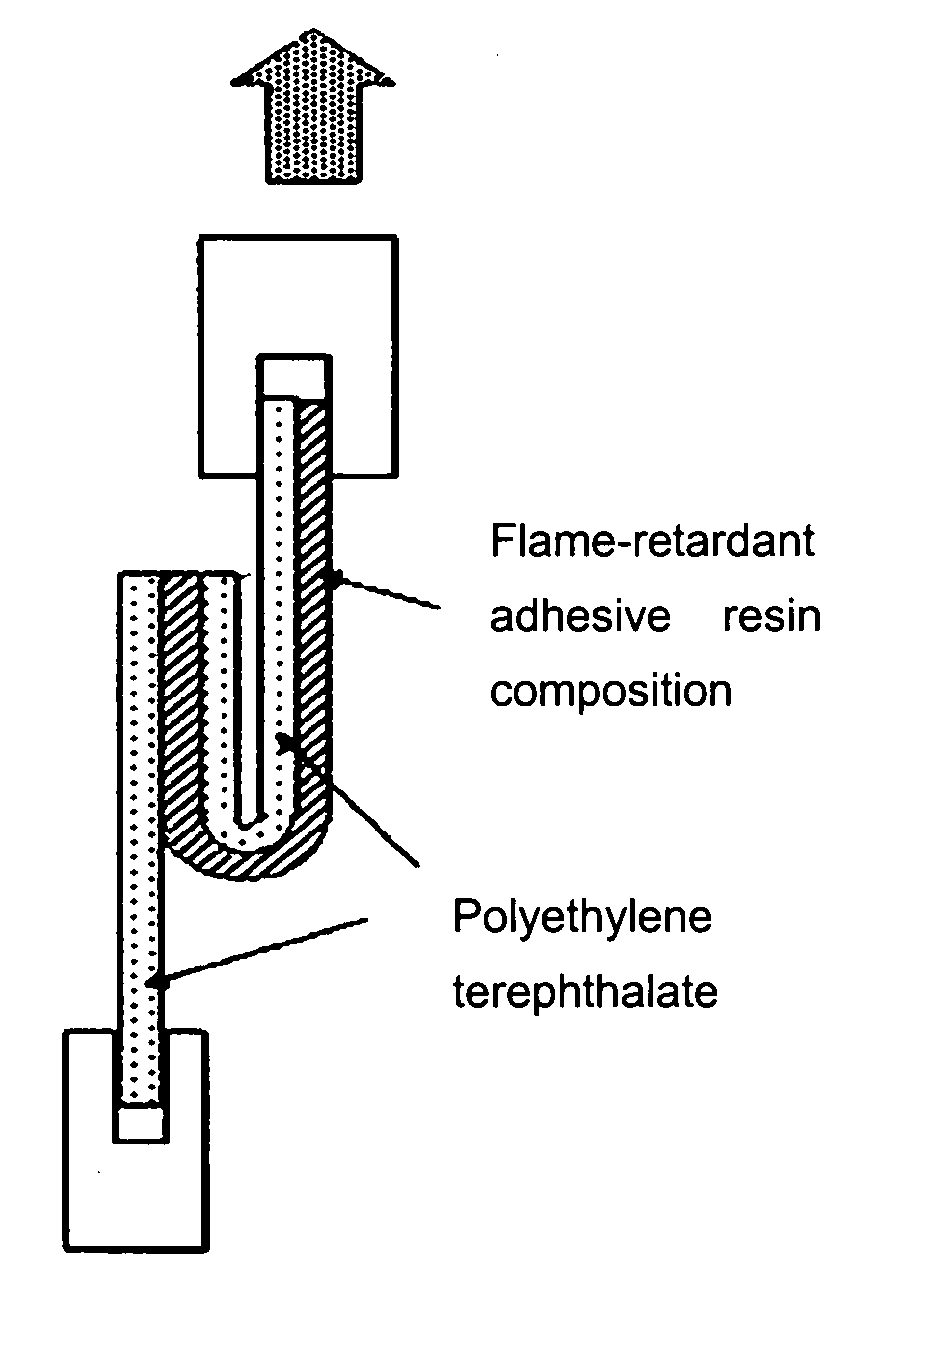 Flame-retardant adhesive composition and laminated film